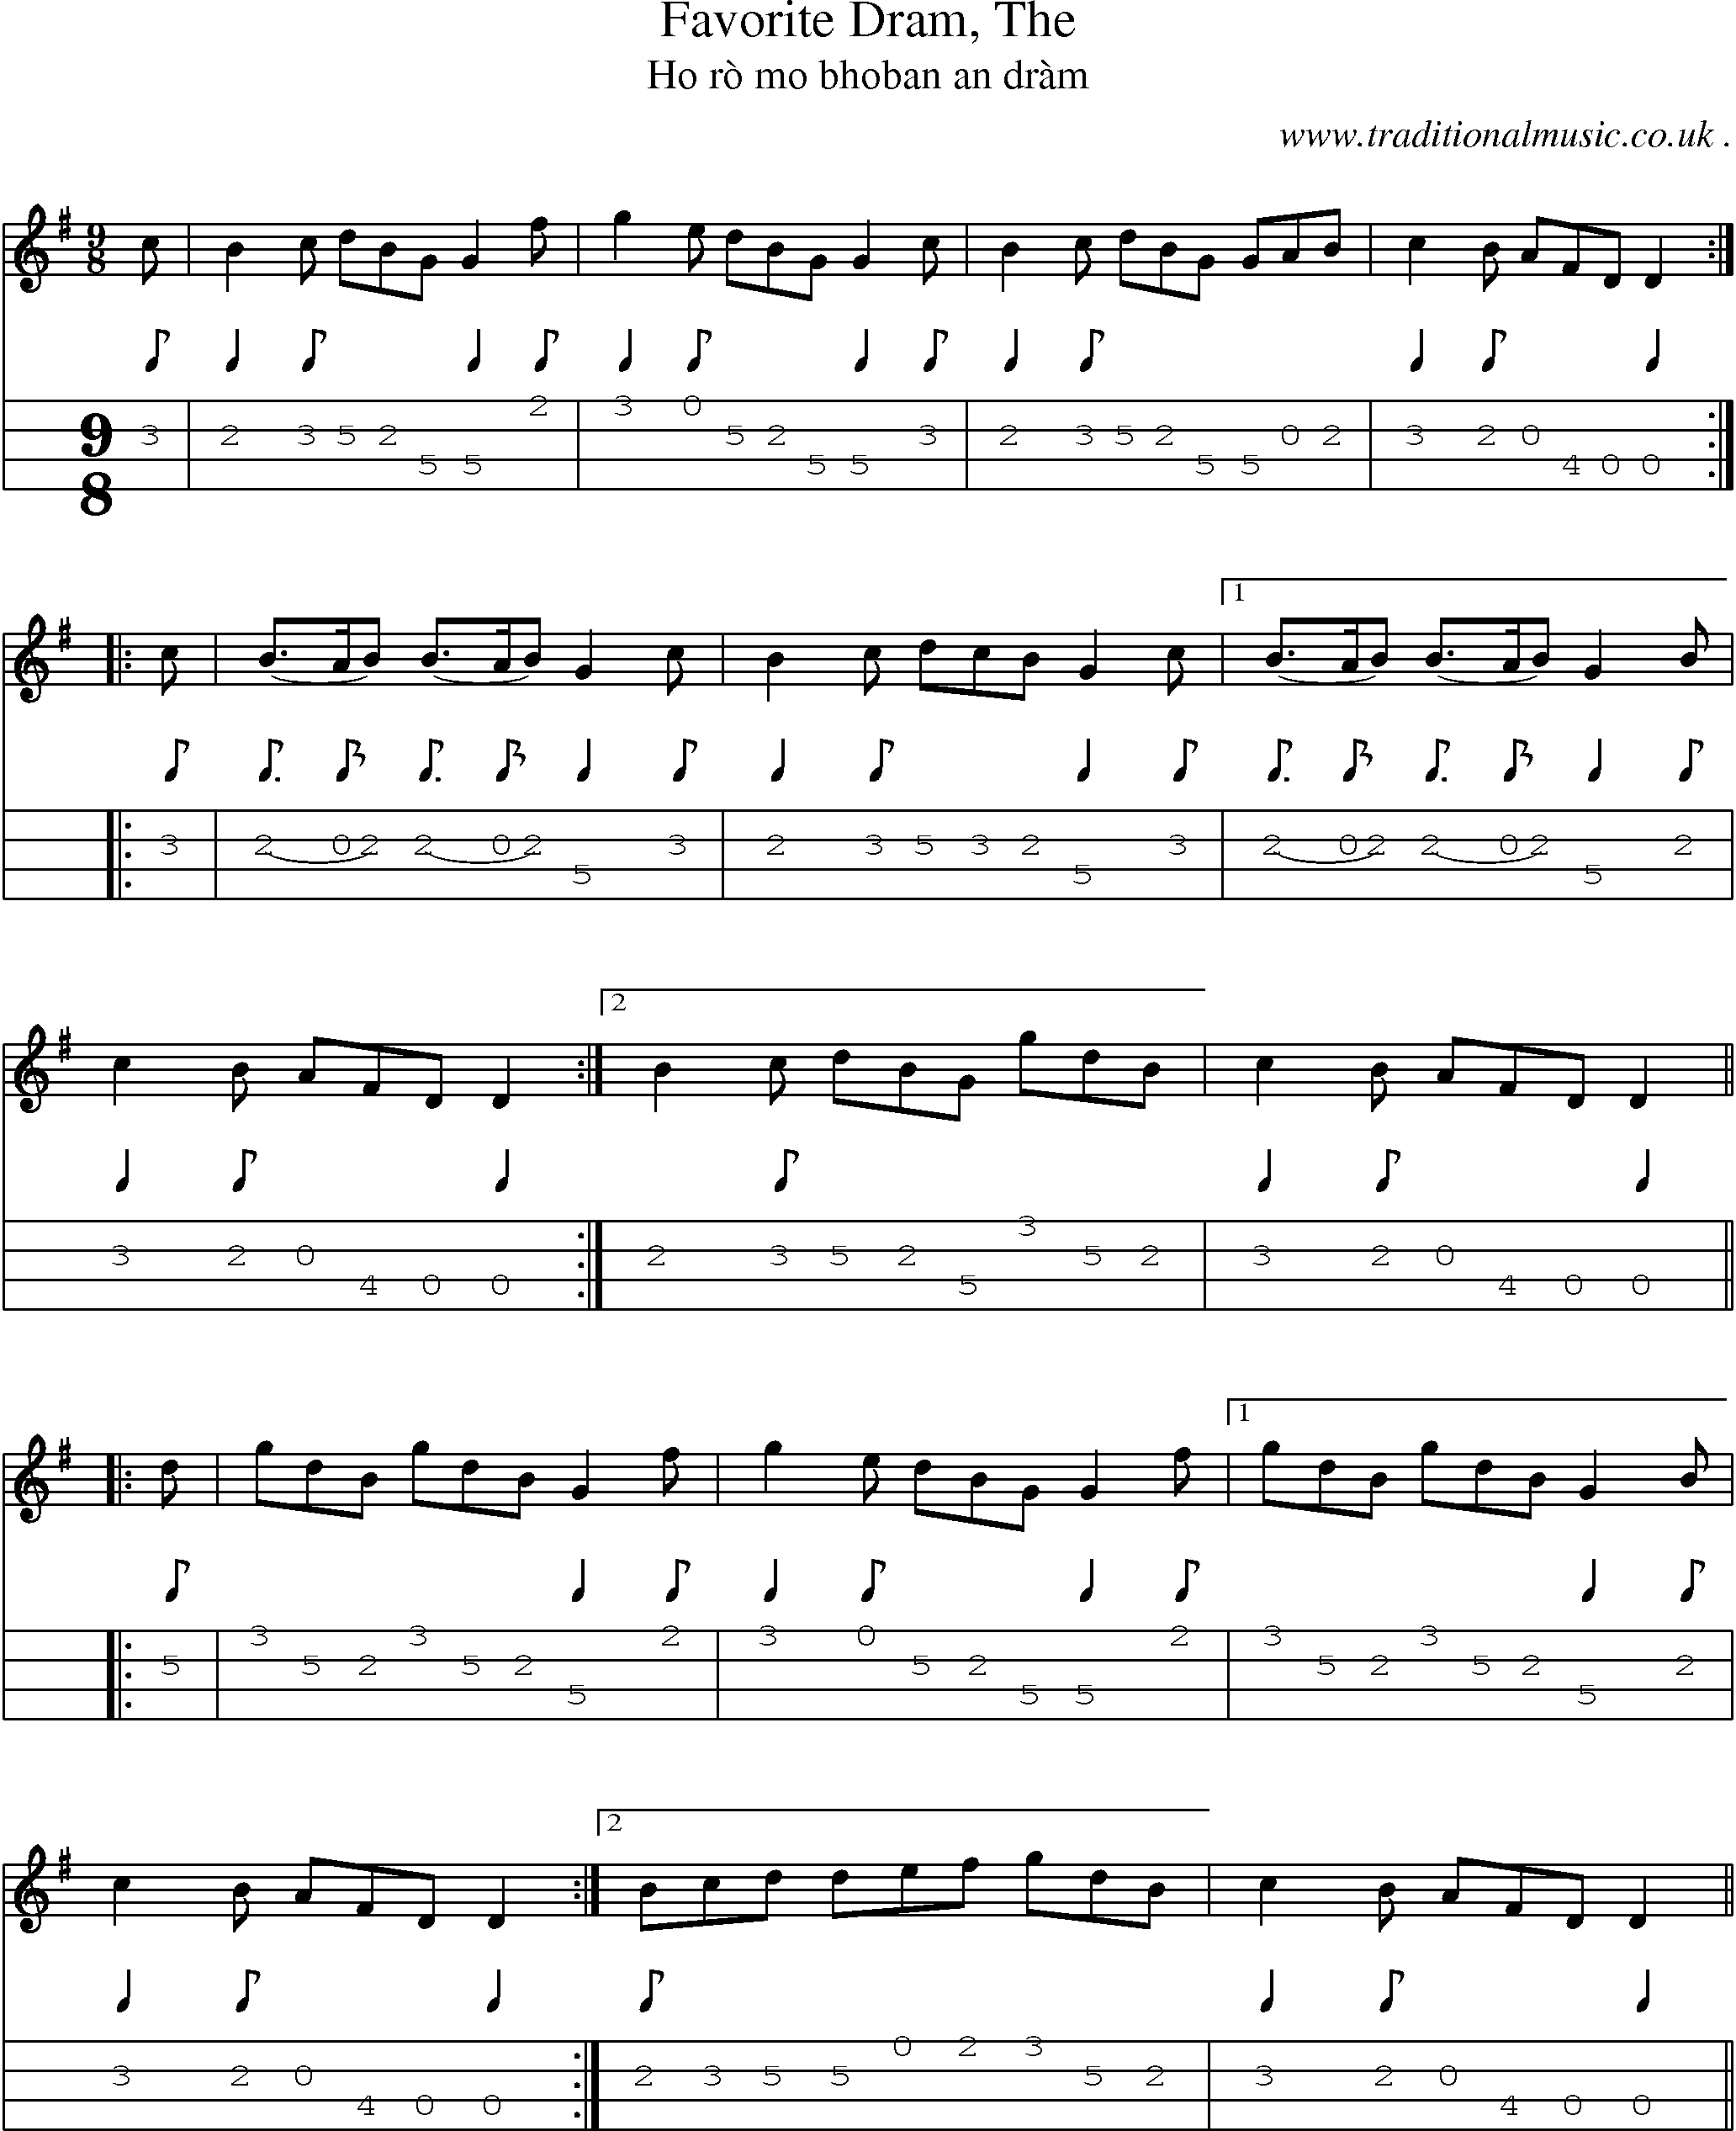 Sheet-music  score, Chords and Mandolin Tabs for Favorite Dram The